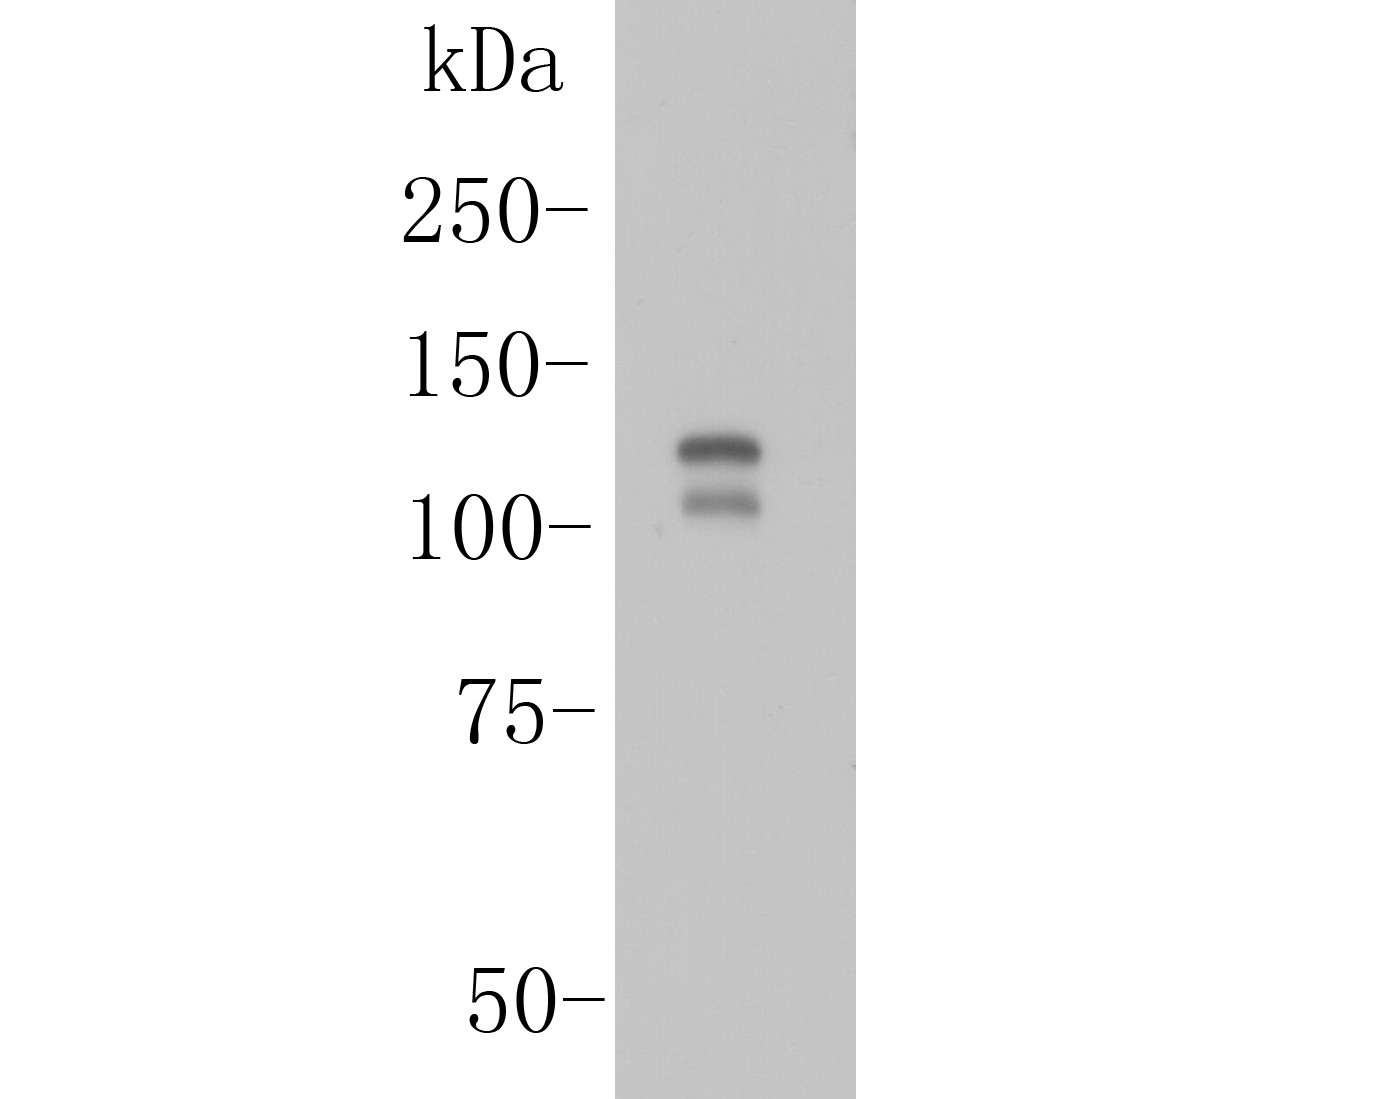 Western blot analysis of ITCH on Mouse pancreatic tissue lysate. Proteins were transferred to a PVDF membrane and blocked with 5% BSA in PBS for 1 hour at room temperature. The primary antibody (ER1901-94, 1/1000) was used in 5% BSA at room temperature for 2 hours. Goat Anti-Rabbit IgG - HRP Secondary Antibody (HA1001) at 1:5,000 dilution was used for 1 hour at room temperature.